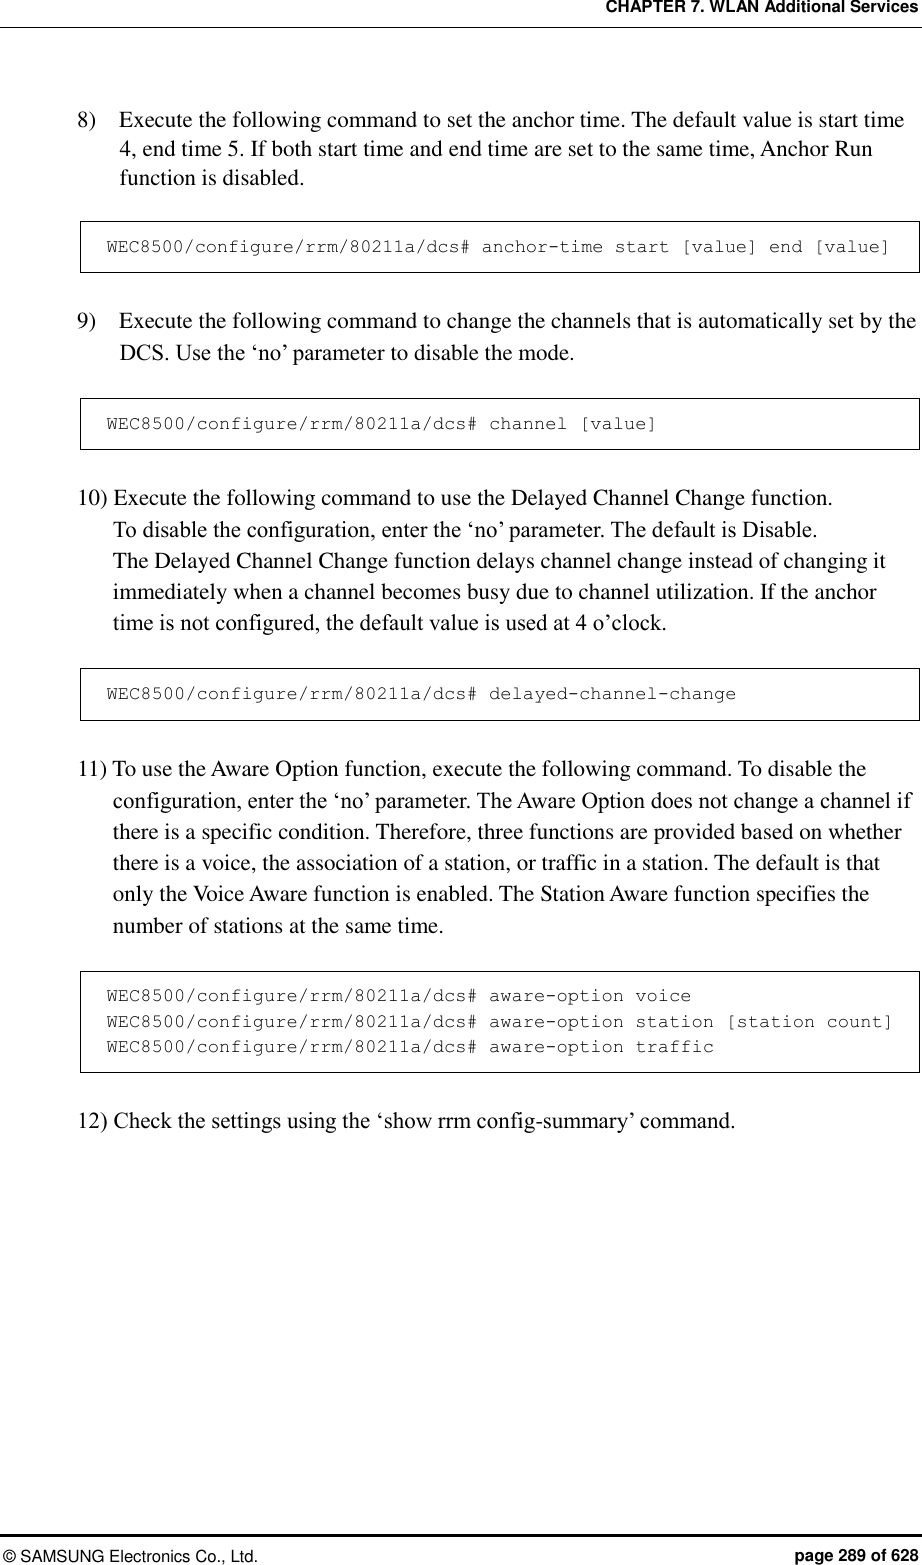 CHAPTER 7. WLAN Additional Services ©  SAMSUNG Electronics Co., Ltd.  page 289 of 628 8)    Execute the following command to set the anchor time. The default value is start time 4, end time 5. If both start time and end time are set to the same time, Anchor Run function is disabled.  WEC8500/configure/rrm/80211a/dcs# anchor-time start [value] end [value]  9)    Execute the following command to change the channels that is automatically set by the DCS. Use the ‘no’ parameter to disable the mode.  WEC8500/configure/rrm/80211a/dcs# channel [value]  10) Execute the following command to use the Delayed Channel Change function.   To disable the configuration, enter the ‘no’ parameter. The default is Disable.   The Delayed Channel Change function delays channel change instead of changing it immediately when a channel becomes busy due to channel utilization. If the anchor time is not configured, the default value is used at 4 o’clock.  WEC8500/configure/rrm/80211a/dcs# delayed-channel-change  11) To use the Aware Option function, execute the following command. To disable the configuration, enter the ‘no’ parameter. The Aware Option does not change a channel if there is a specific condition. Therefore, three functions are provided based on whether there is a voice, the association of a station, or traffic in a station. The default is that only the Voice Aware function is enabled. The Station Aware function specifies the number of stations at the same time.  WEC8500/configure/rrm/80211a/dcs# aware-option voice WEC8500/configure/rrm/80211a/dcs# aware-option station [station count] WEC8500/configure/rrm/80211a/dcs# aware-option traffic  12) Check the settings using the ‘show rrm config-summary’ command.  